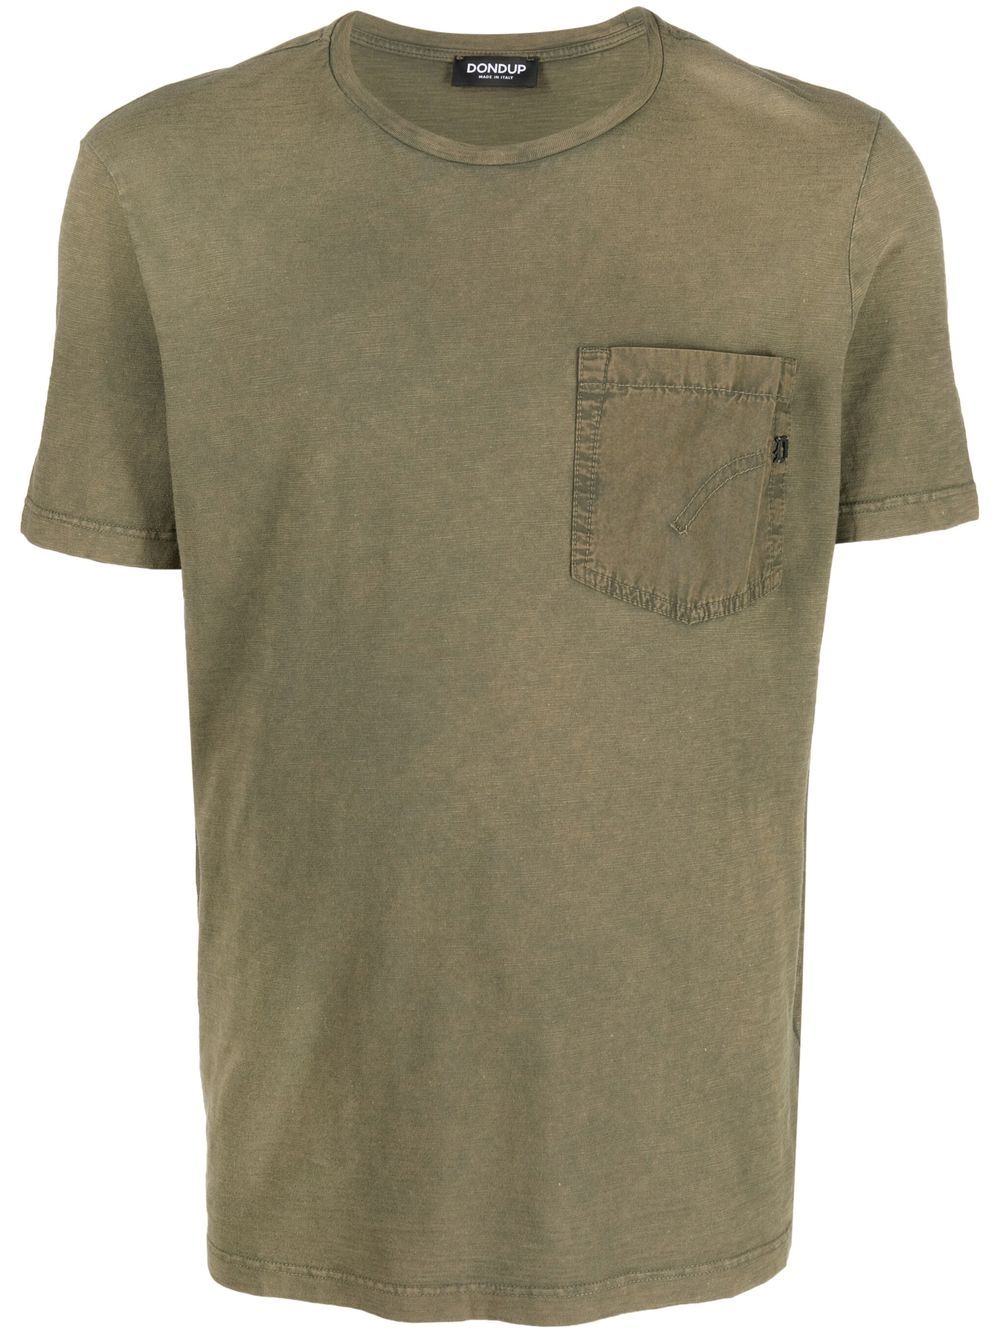 Dondup Chest Pocket T-shirt In Green